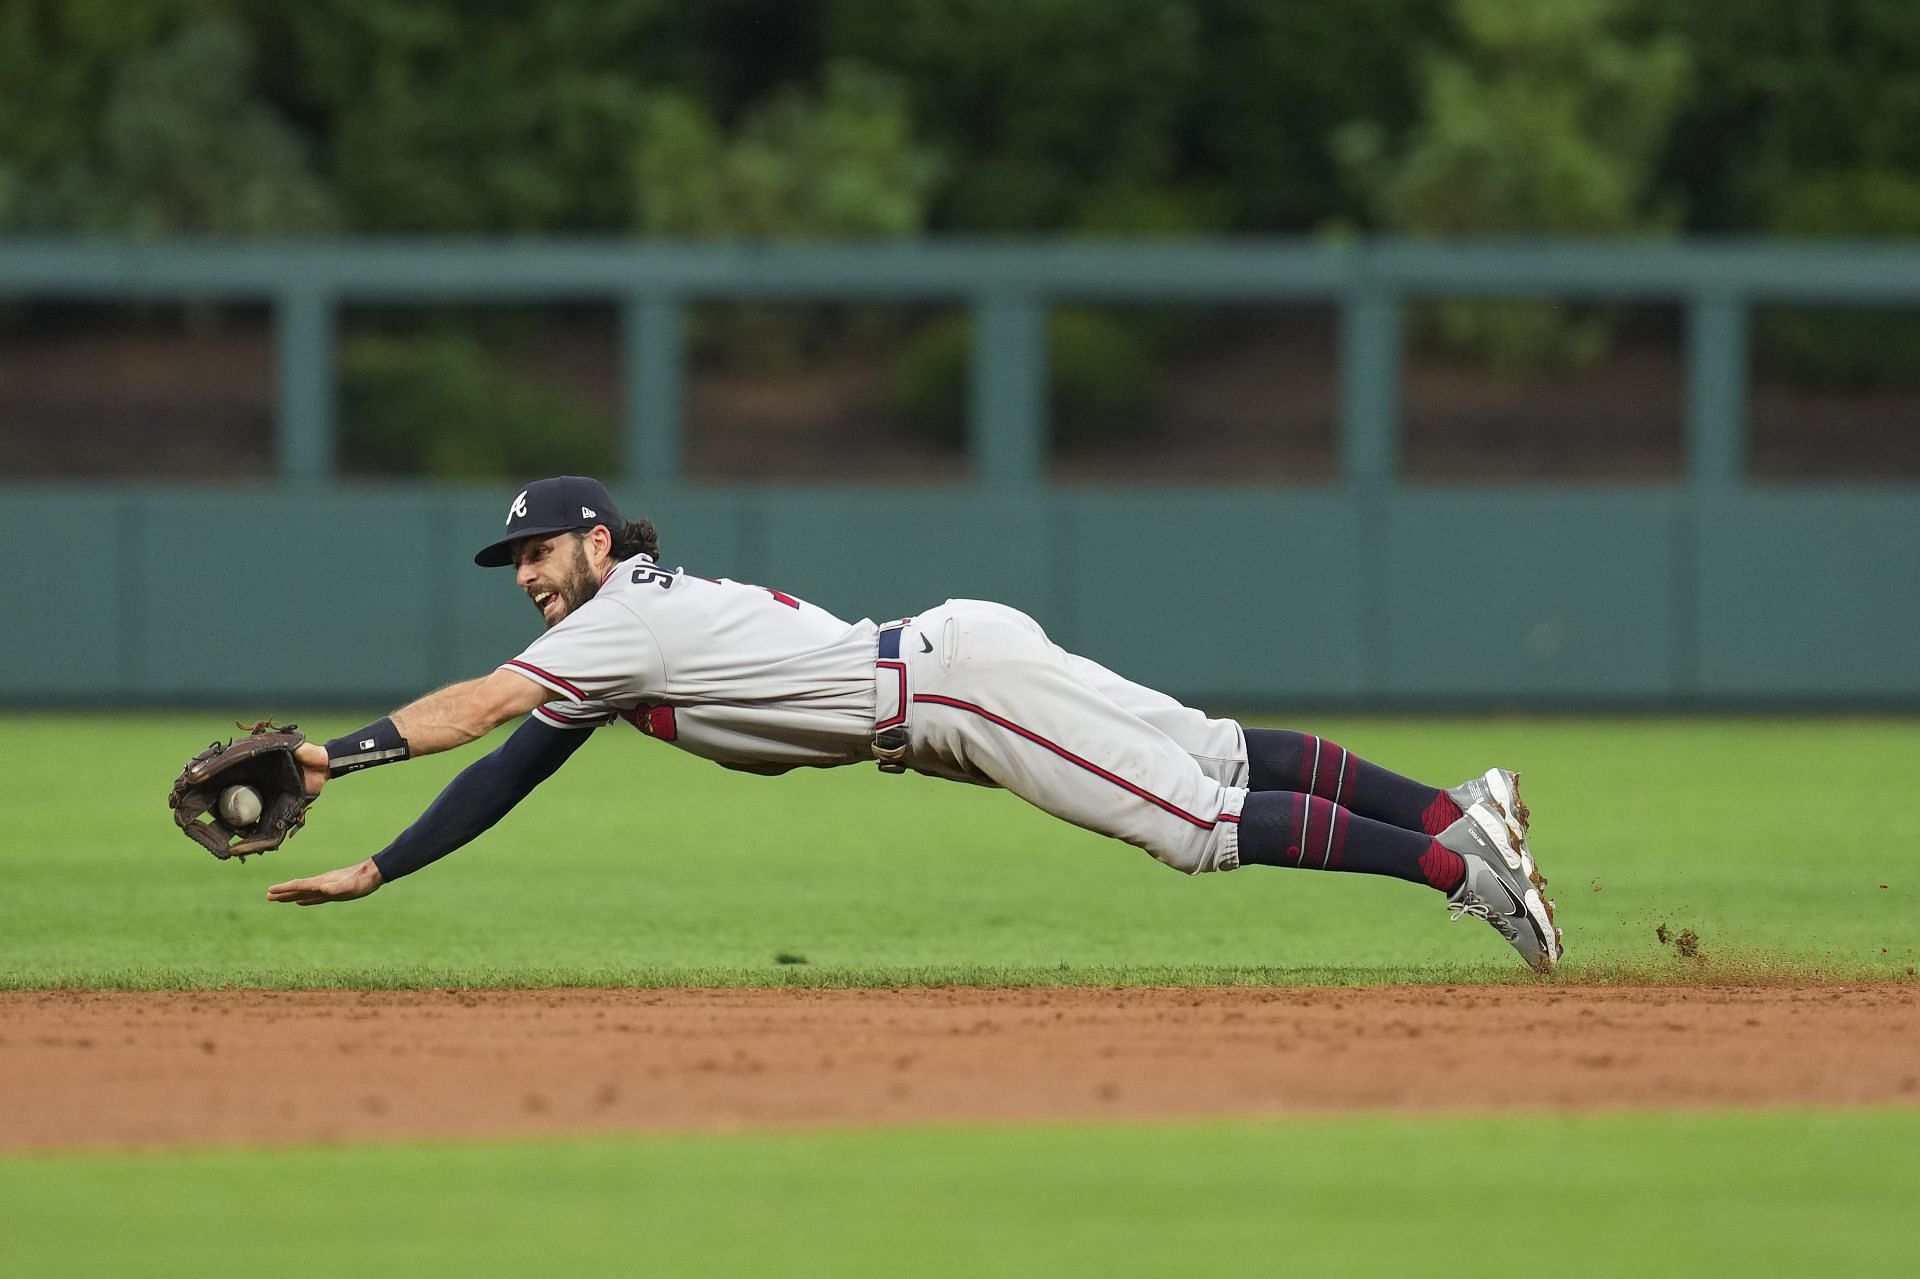 Battery Power: Is there a next level in Dansby Swanson's game